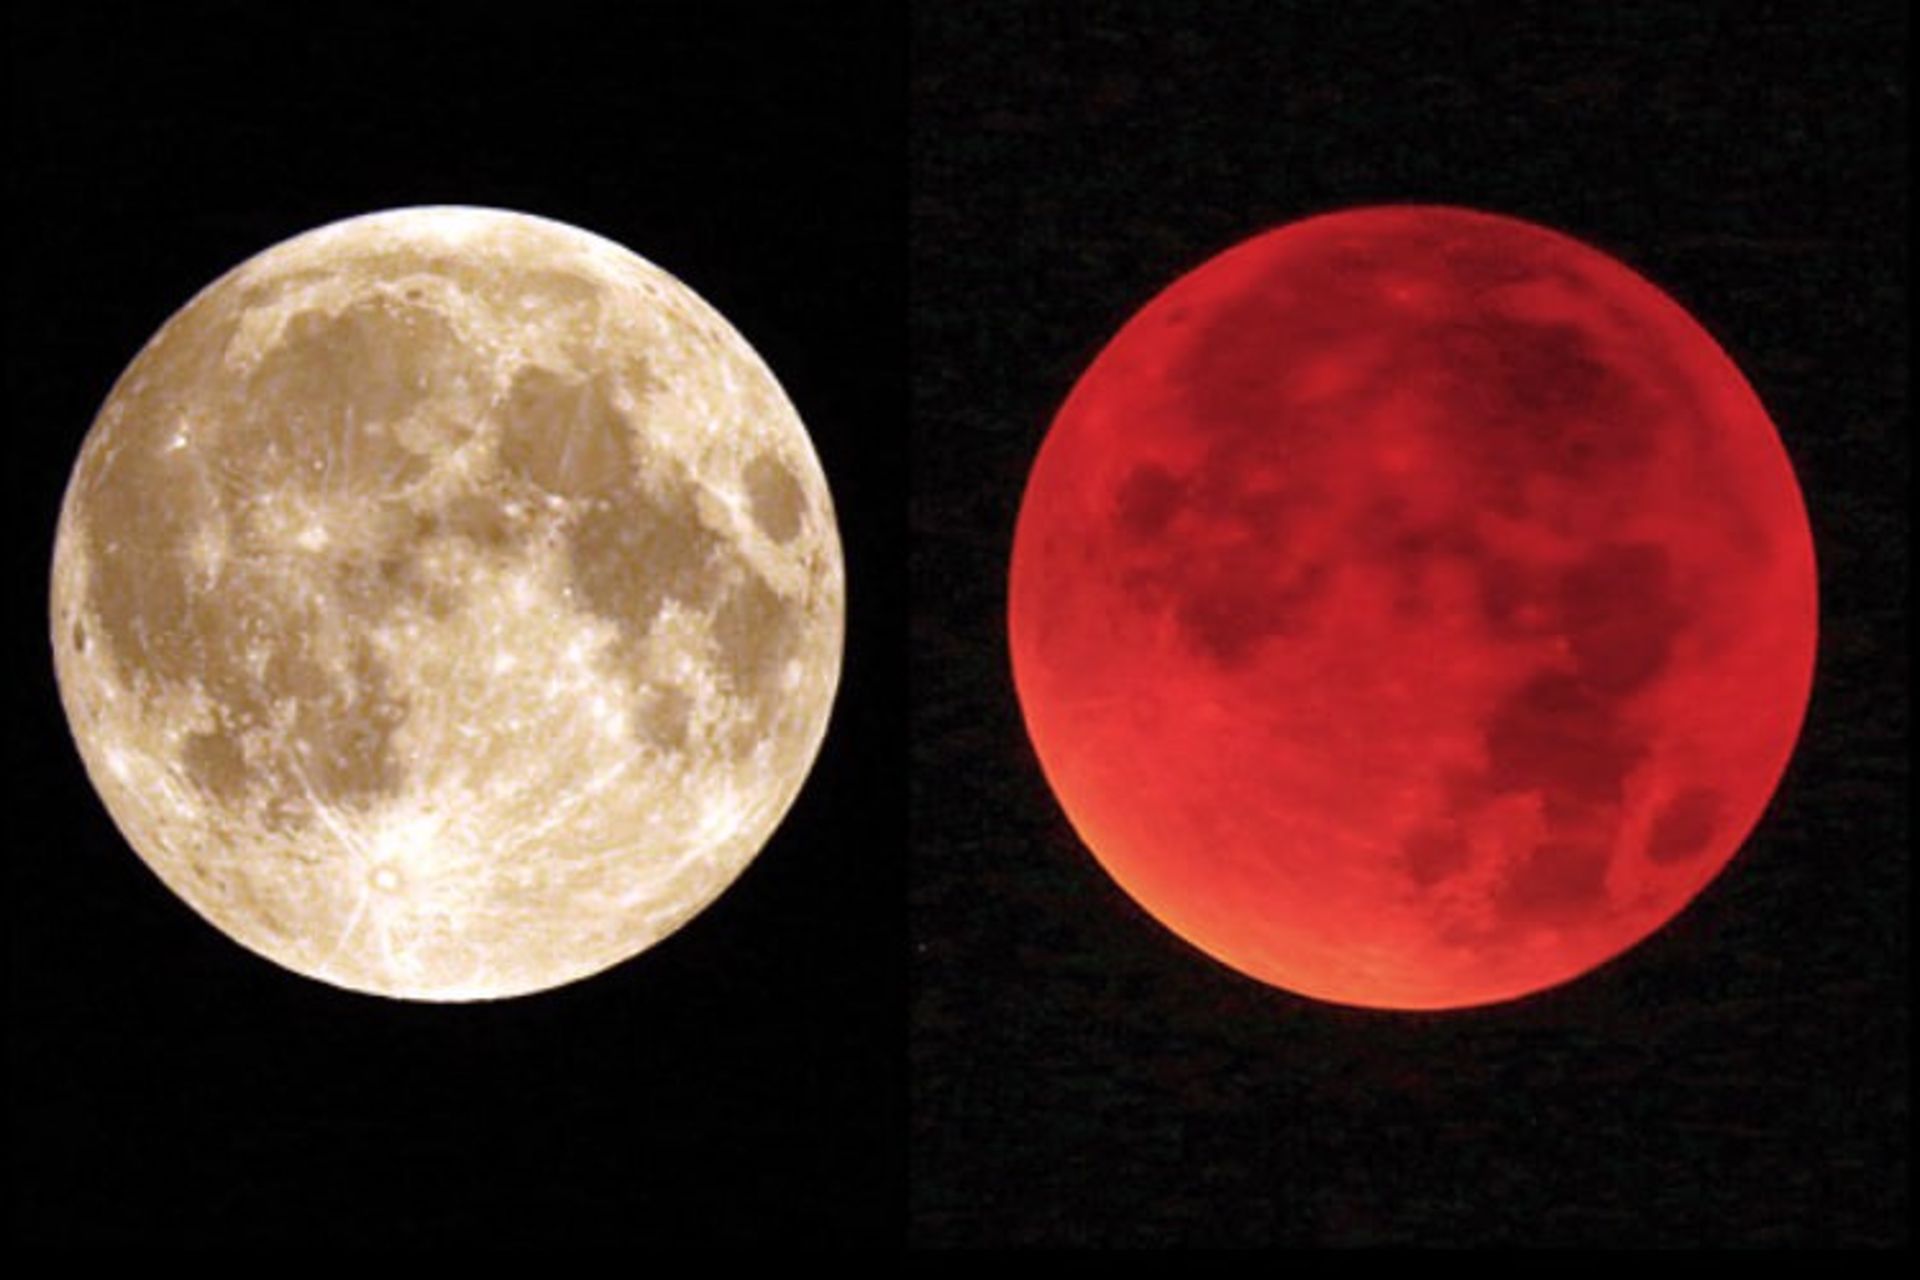 supermoon wite red germany 3455452b 1600x1200